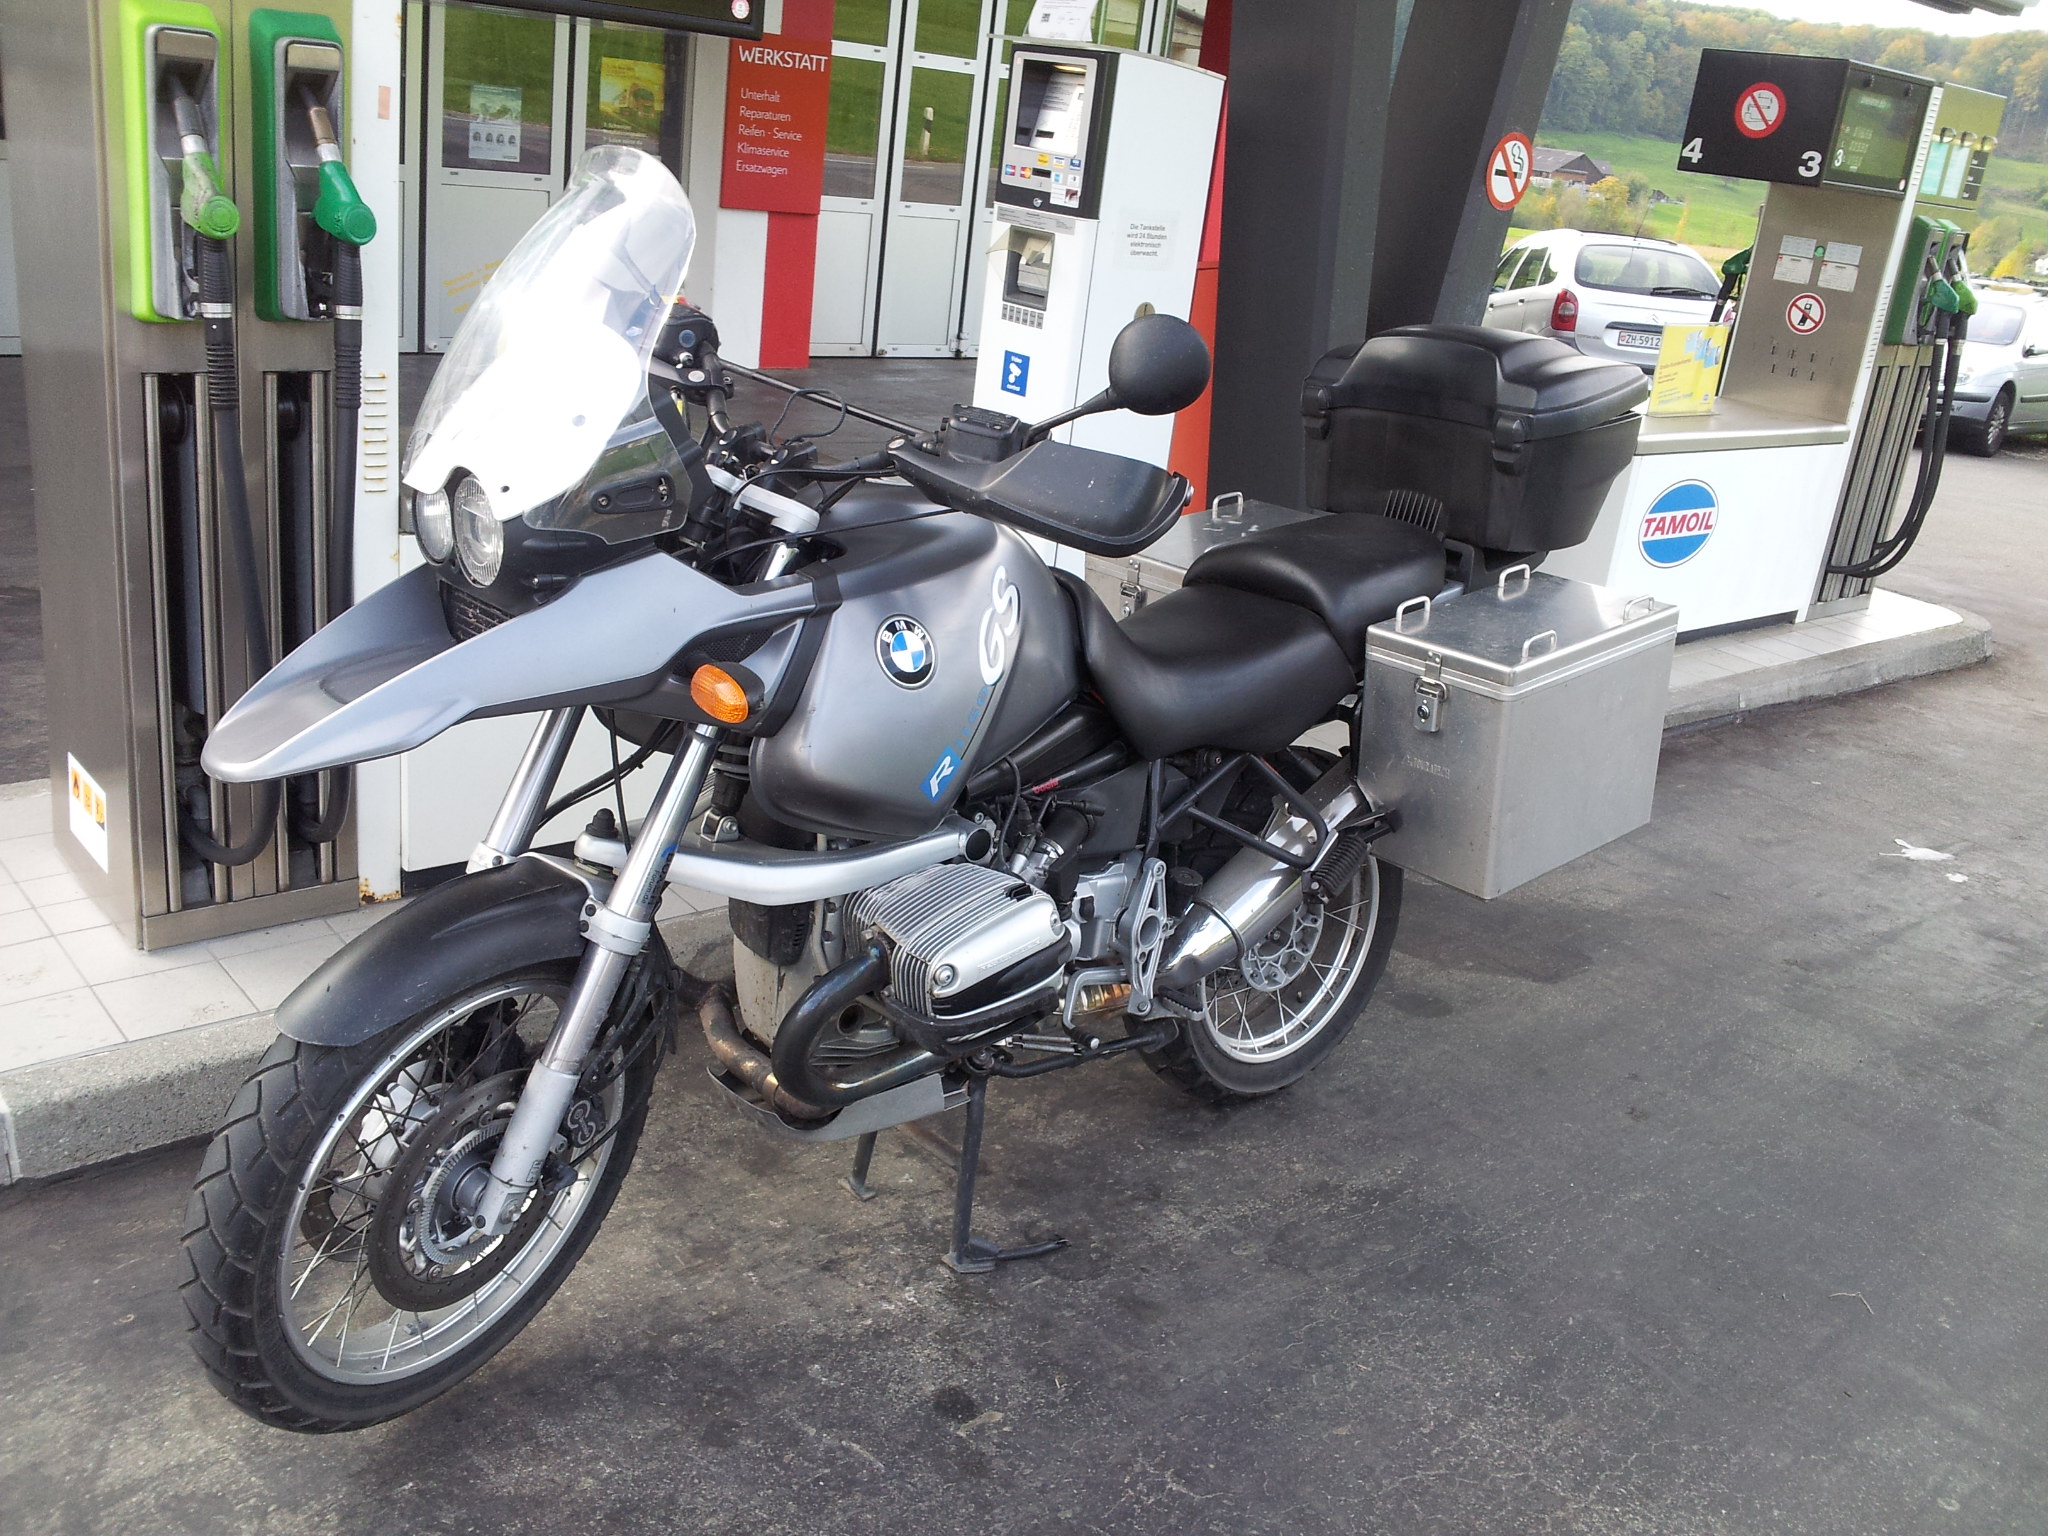 BMW GS 1150 for round the world